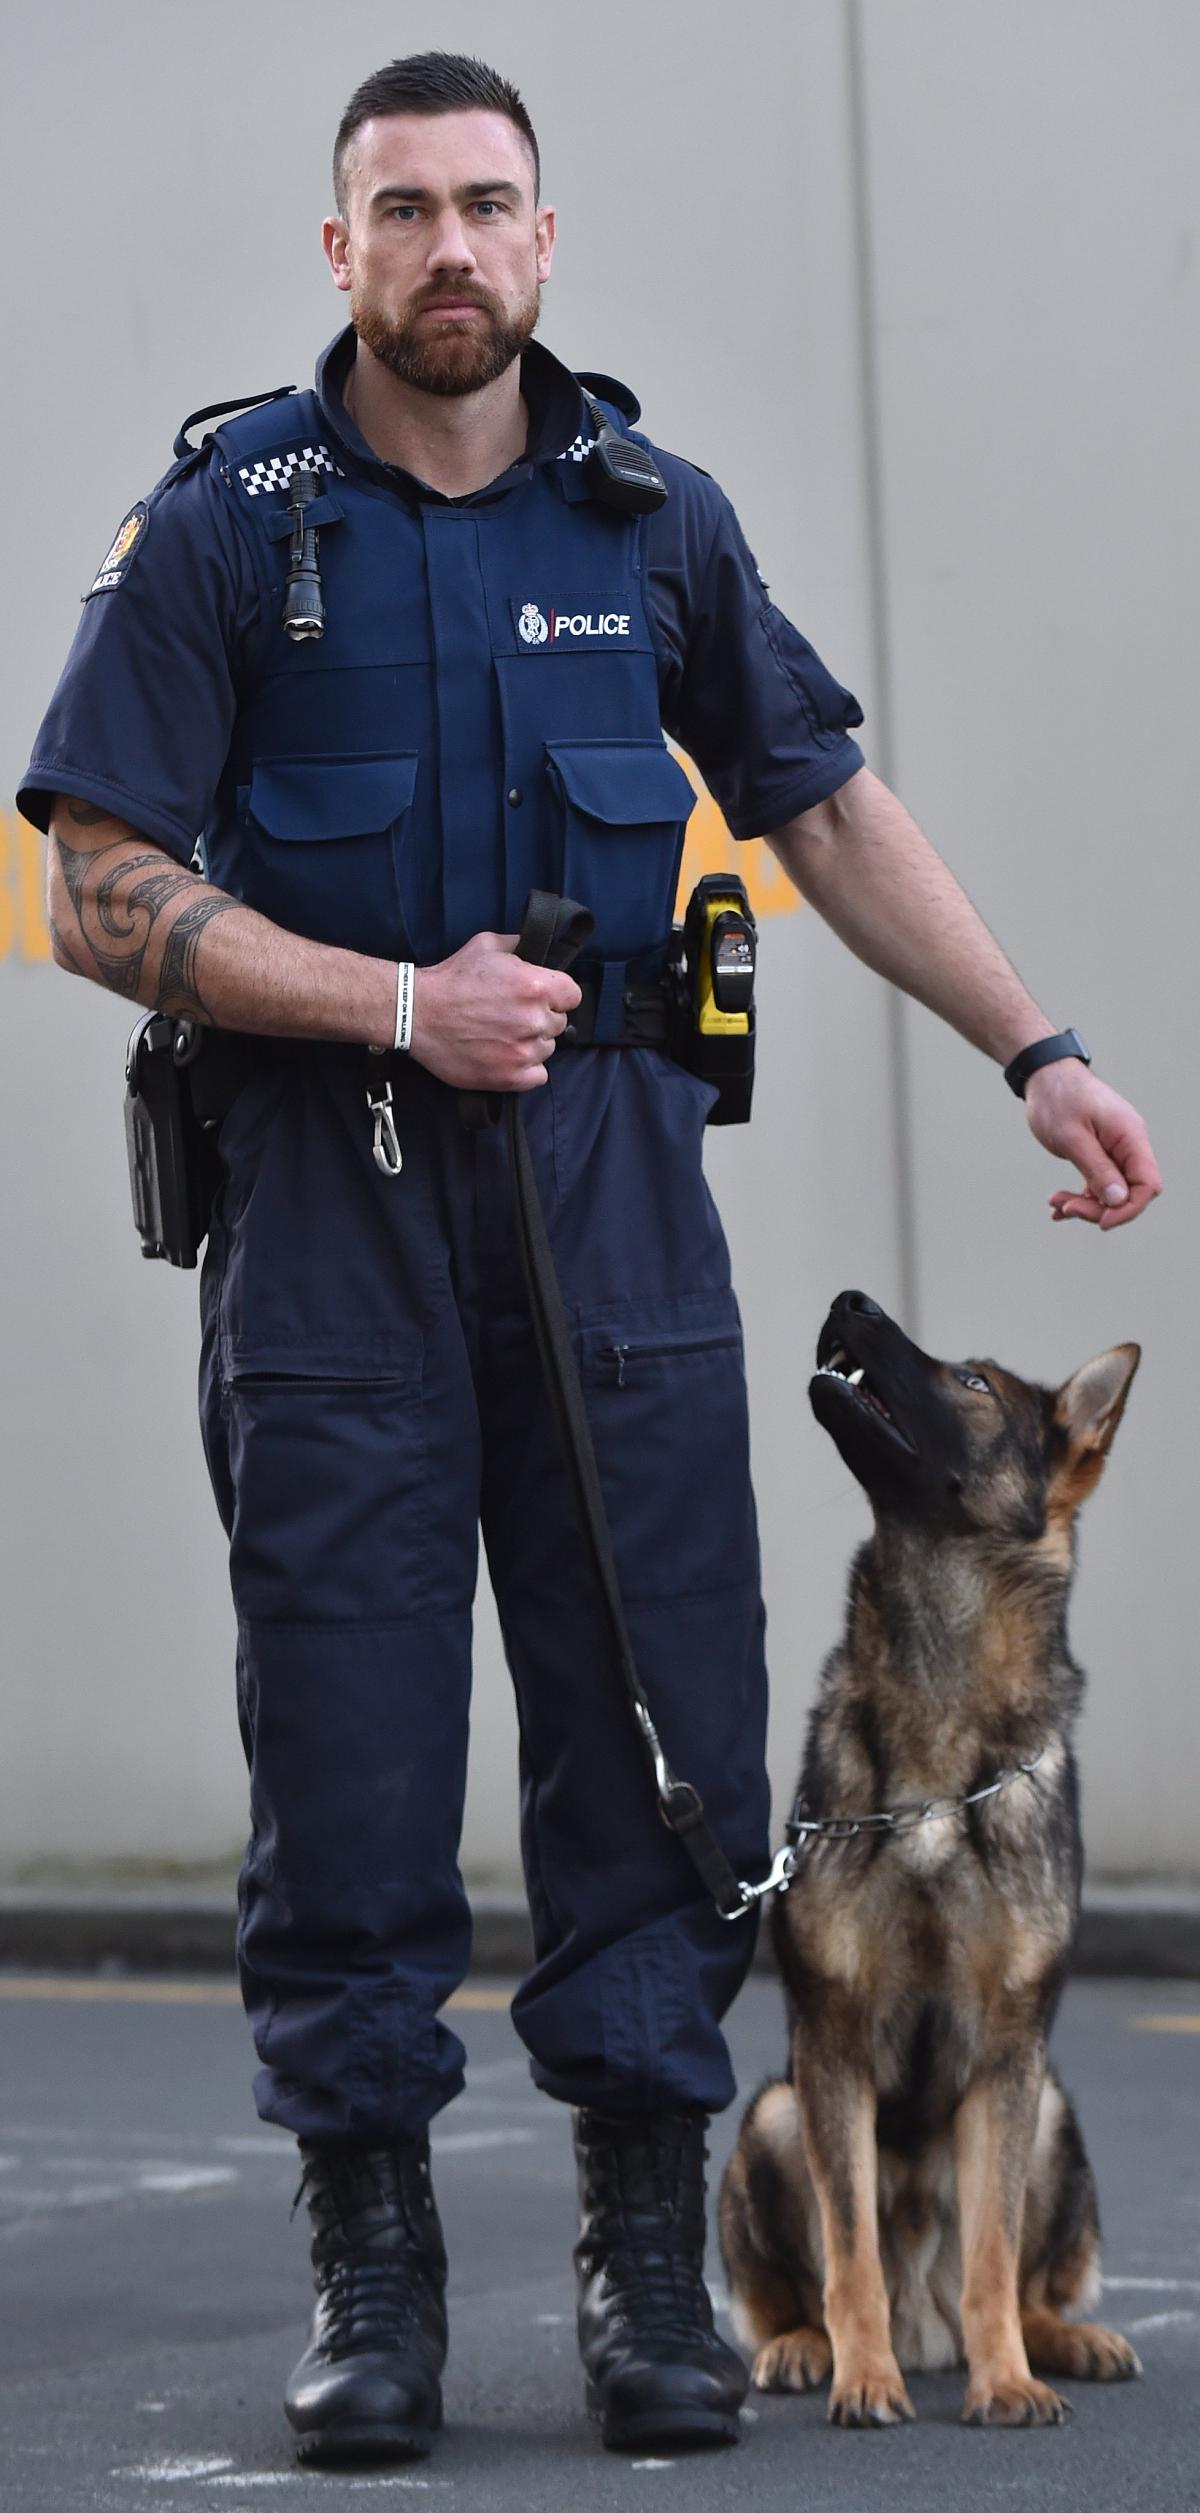 Shot policeman loves his work | Otago Daily Times Online News